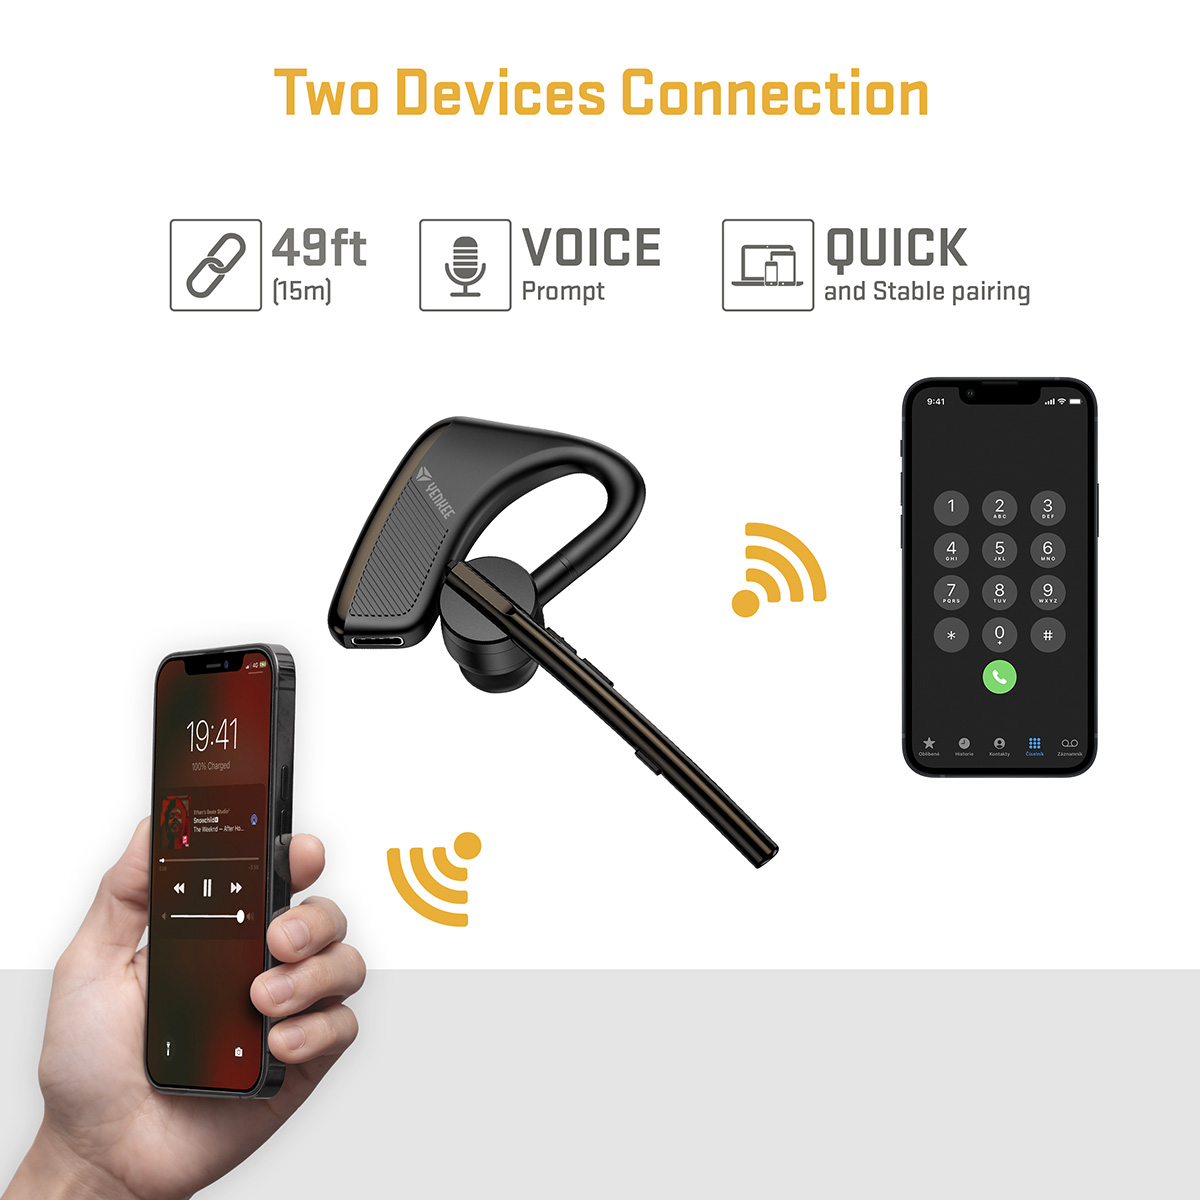 Two device connection